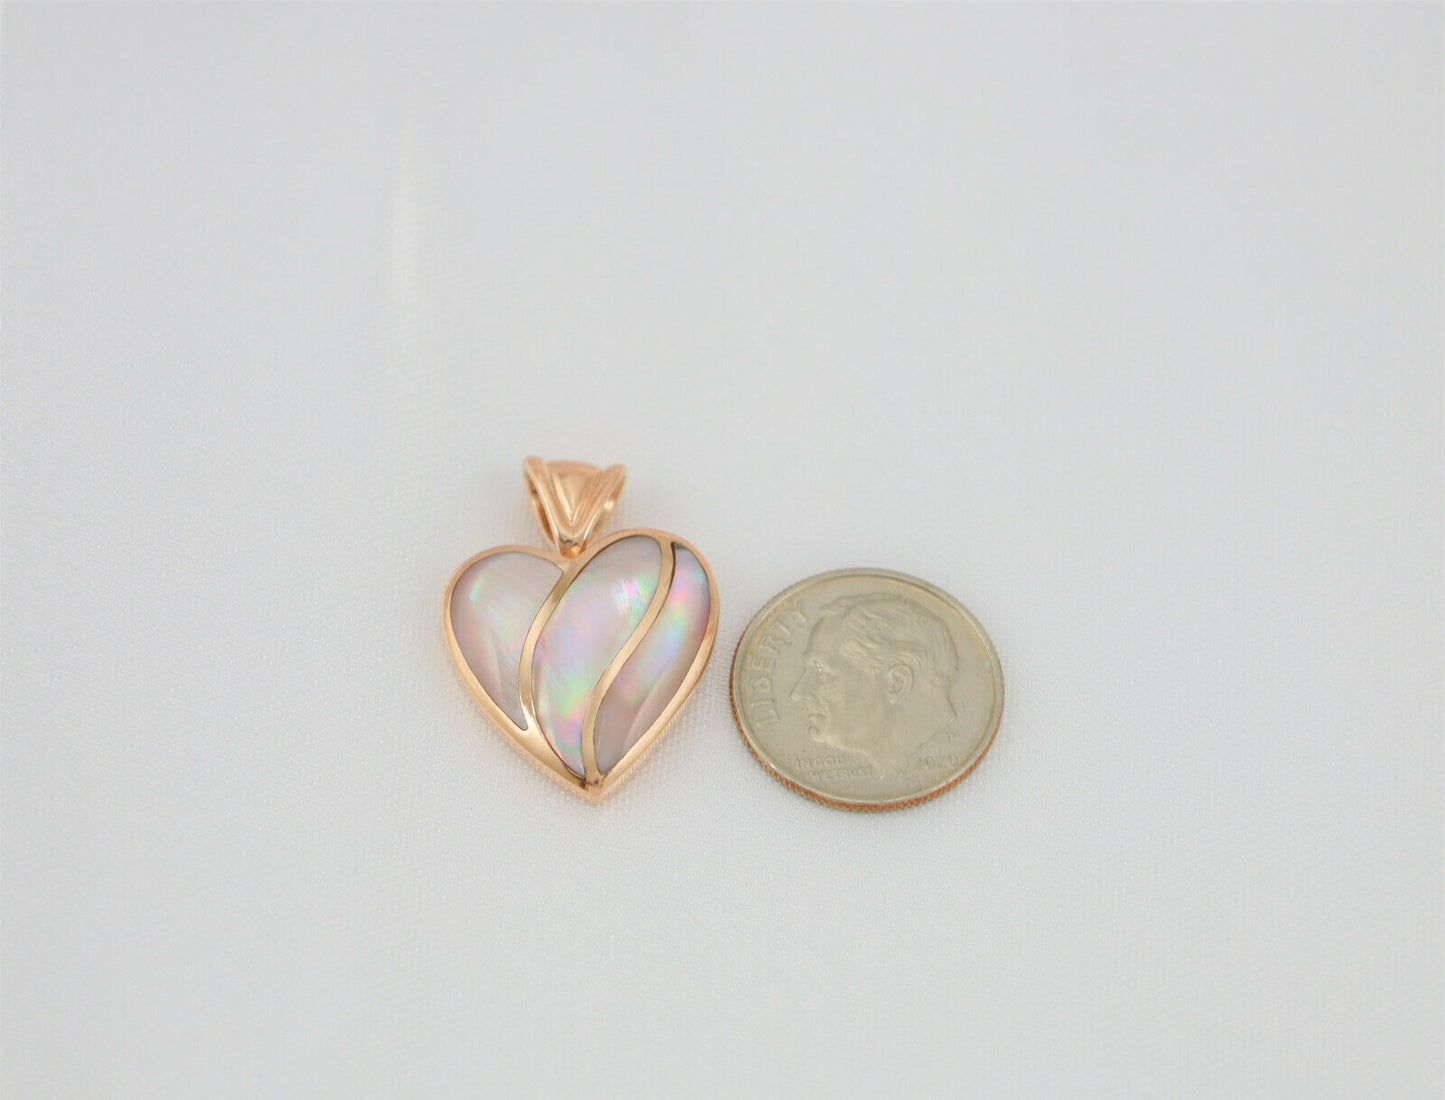 14k Rose Gold Kabana Heart Pendant with Pink Mother of Pearl Inlay - 6.0g